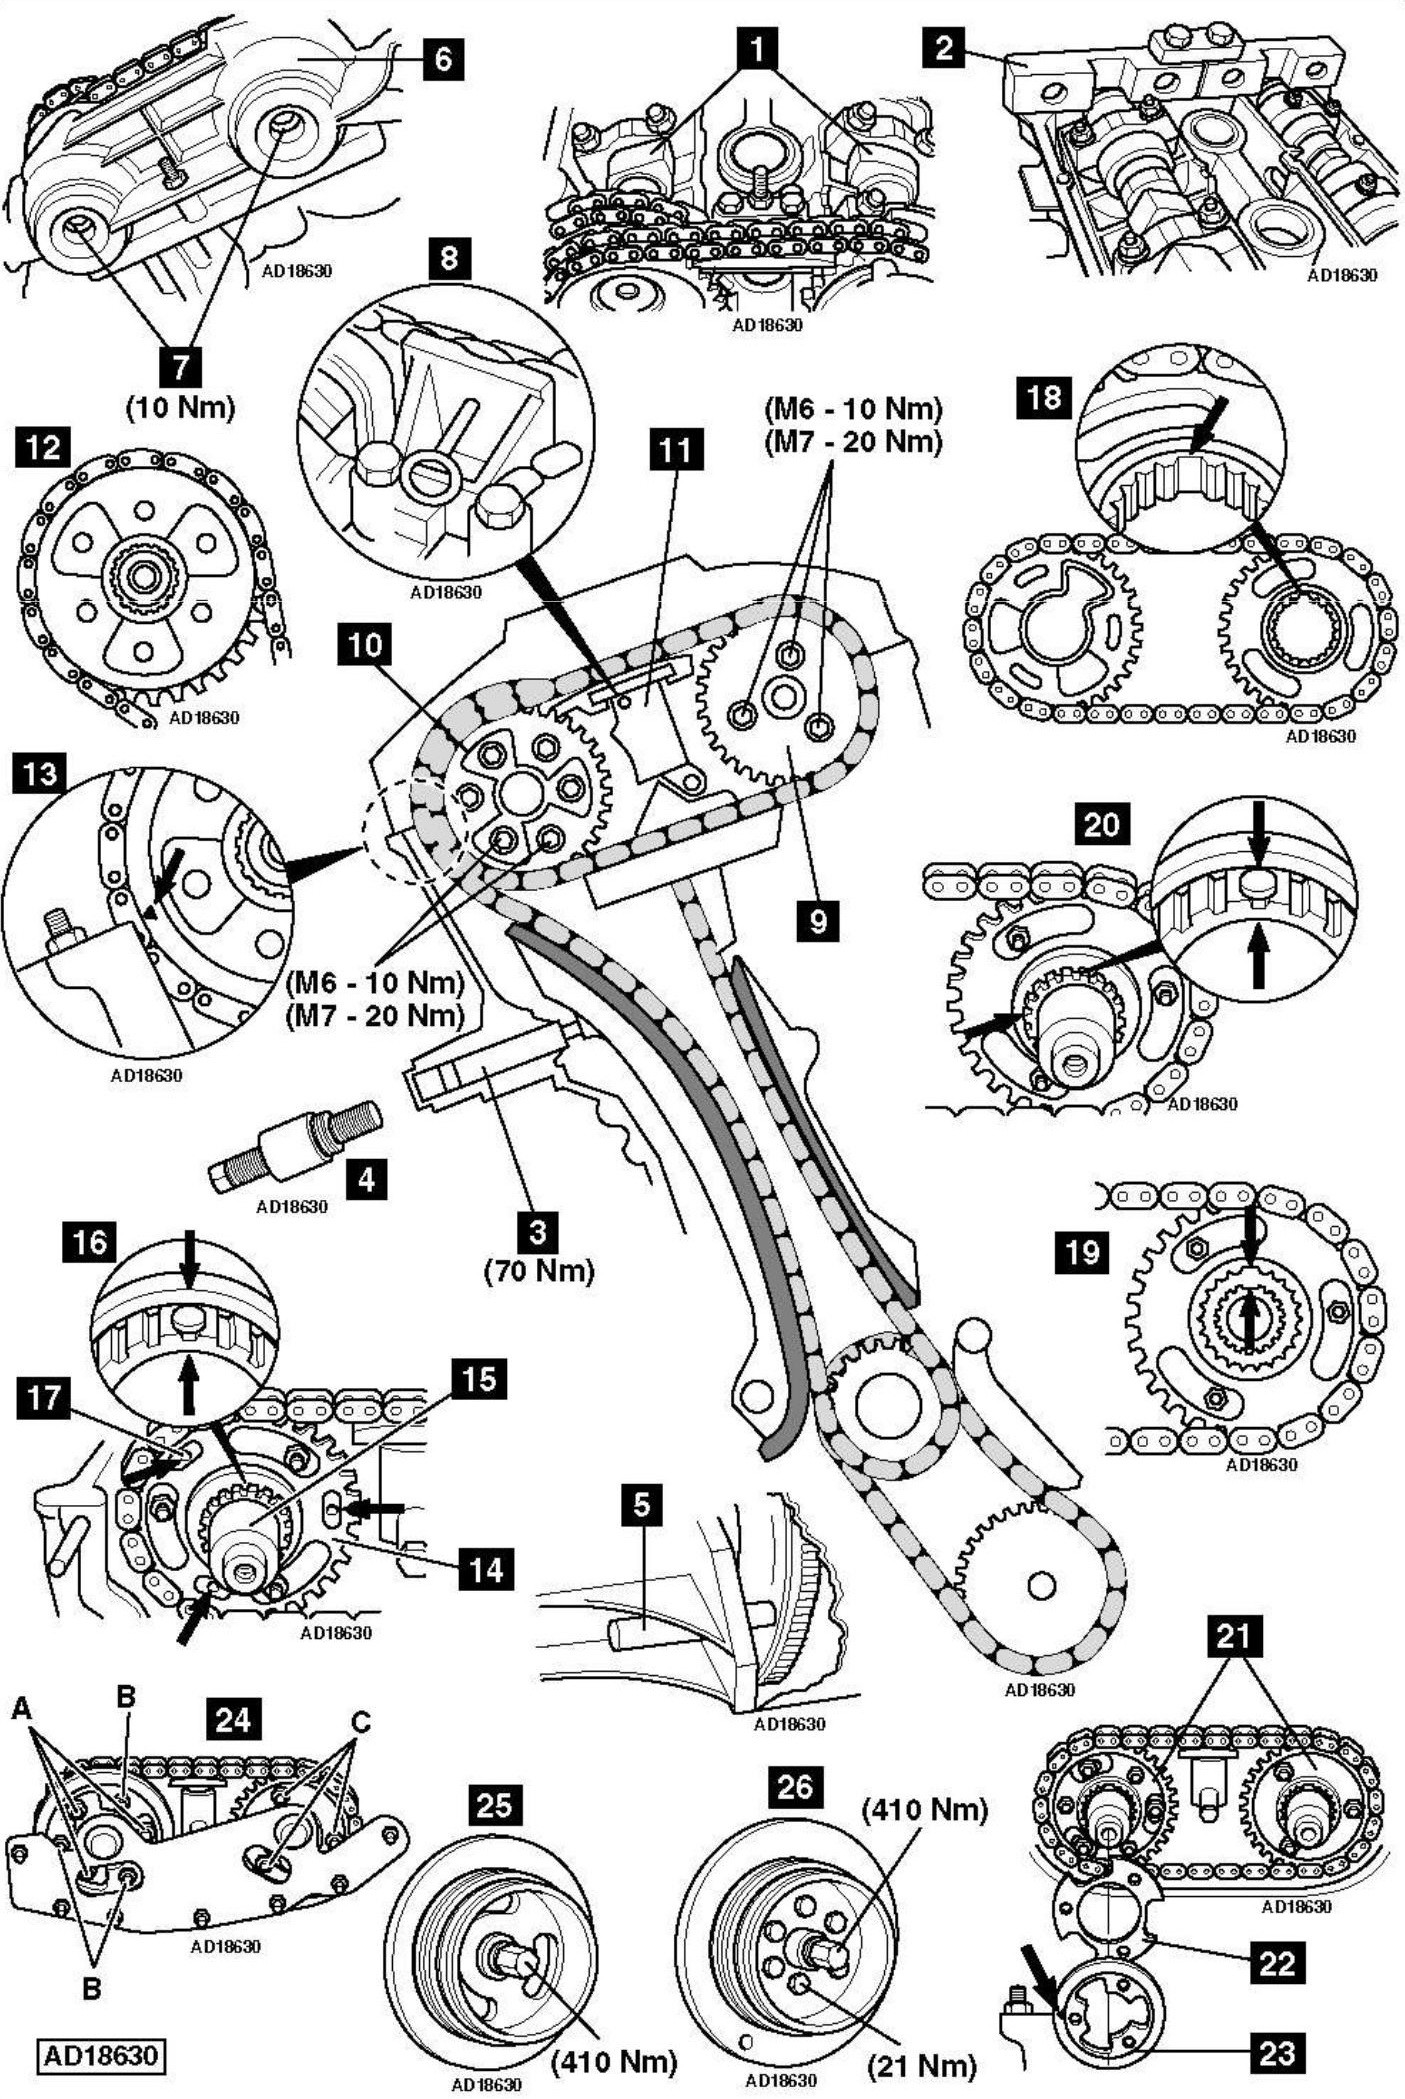 Bmw E46 2.0d Wiring Diagram How to Replace Timing Chain On Bmw 323i E46 Timing Belt Of Bmw E46 2.0d Wiring Diagram